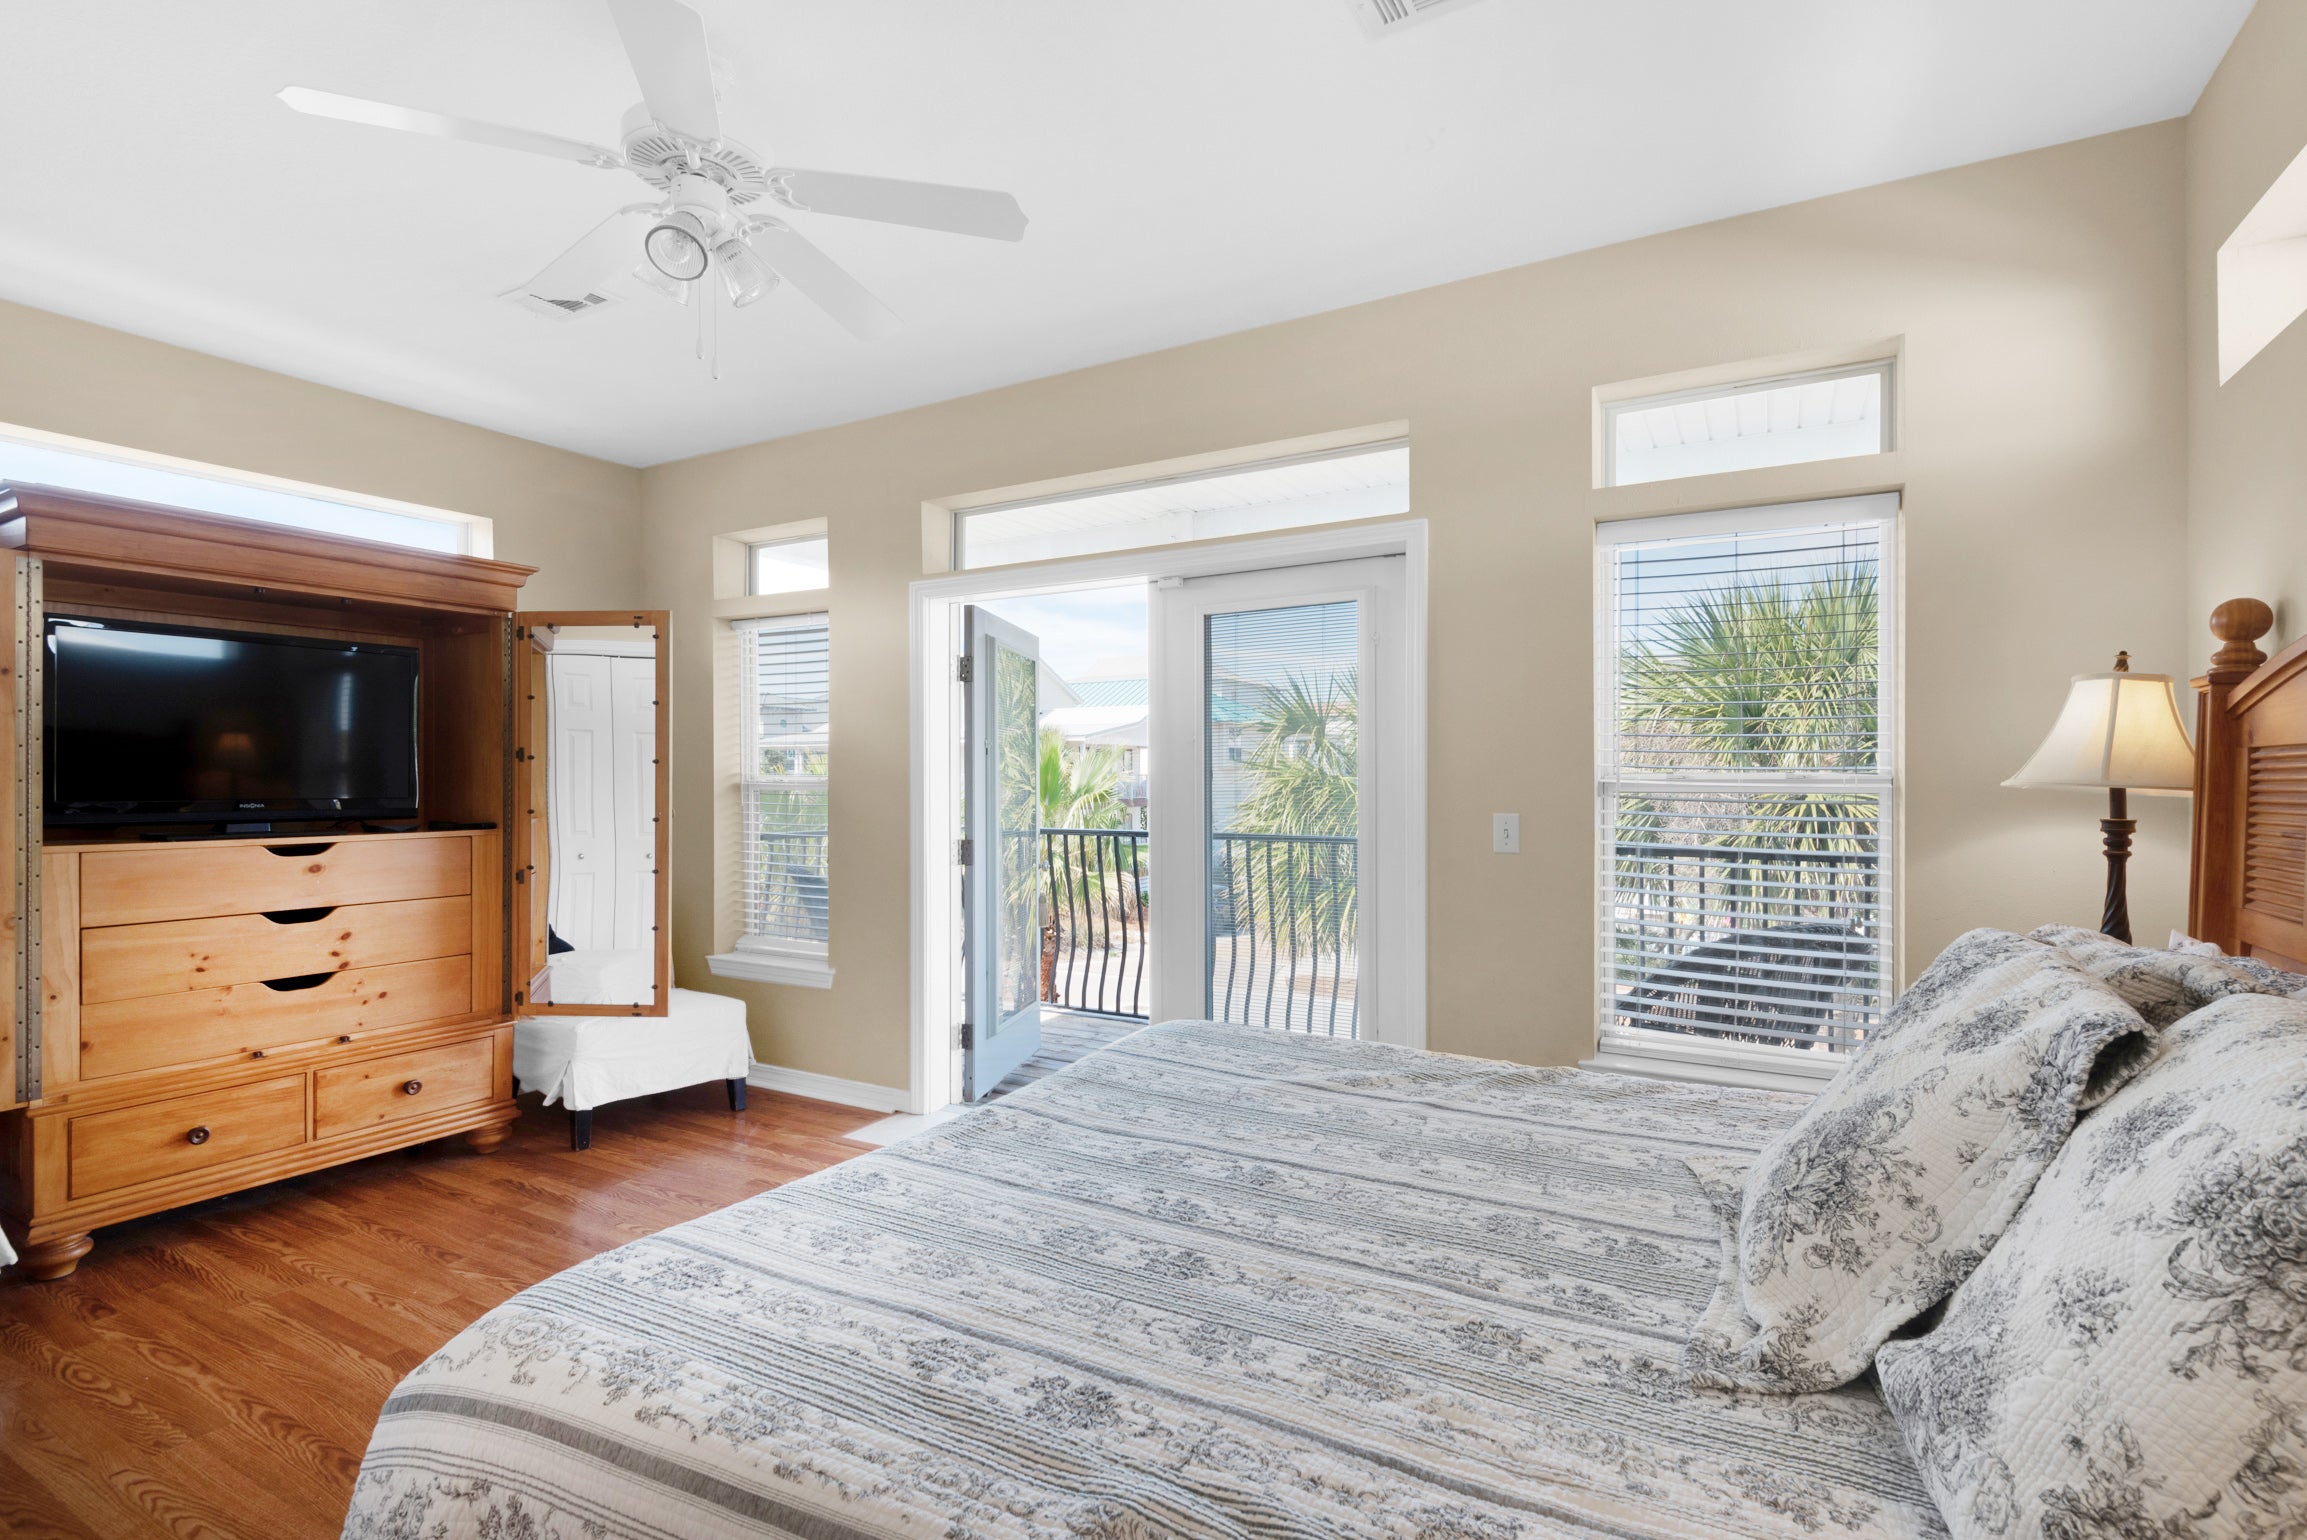 Master suite with balcony access